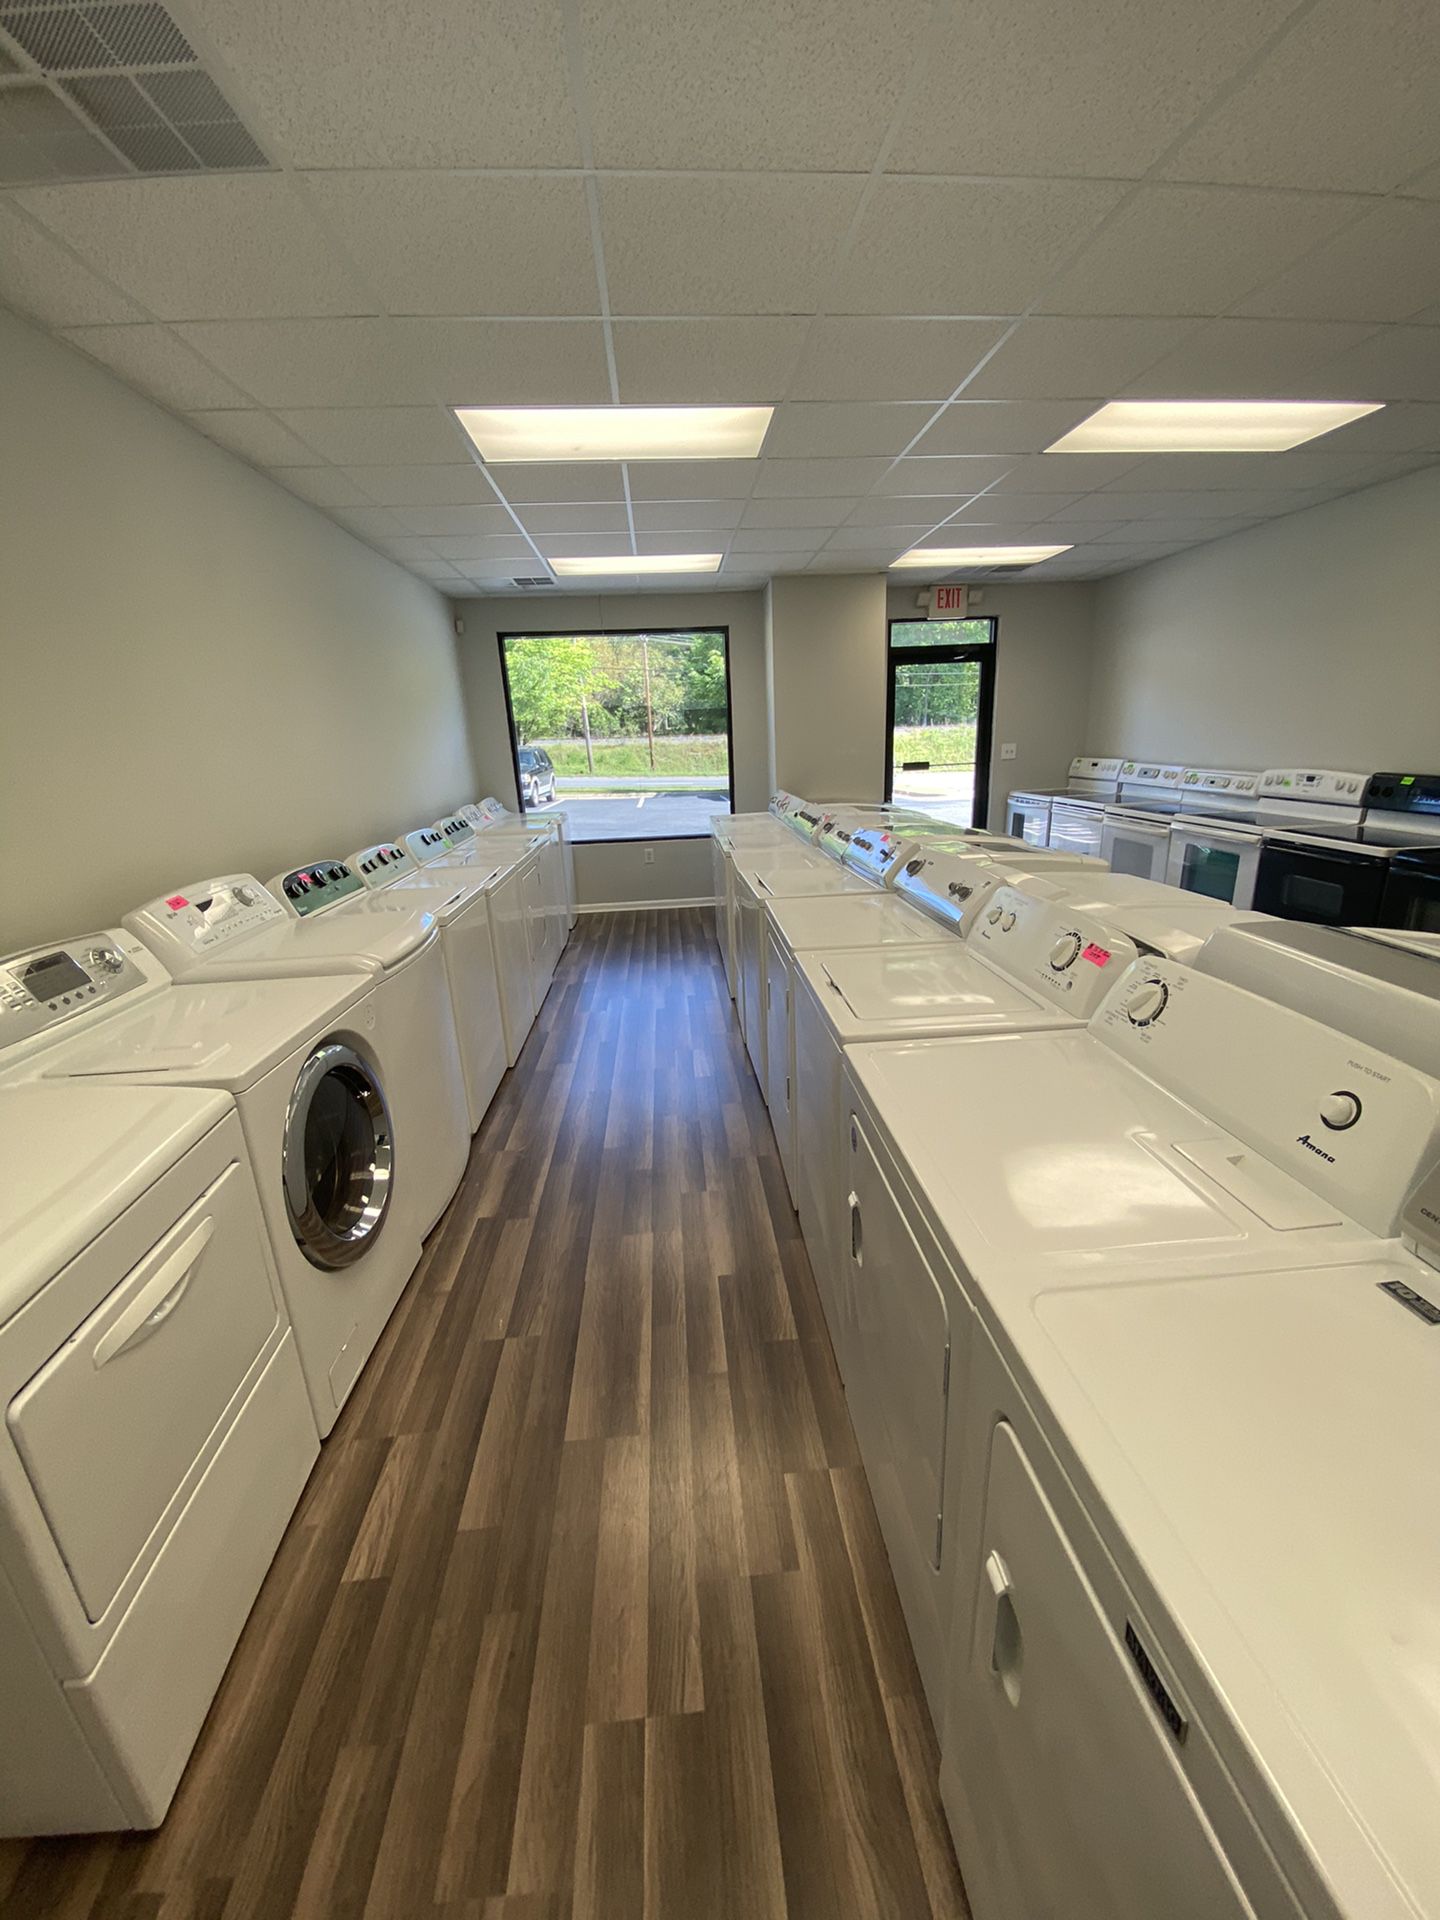 🔥🔥washer and dryers set price starting $399 up 90 days warranty 🔥🔥